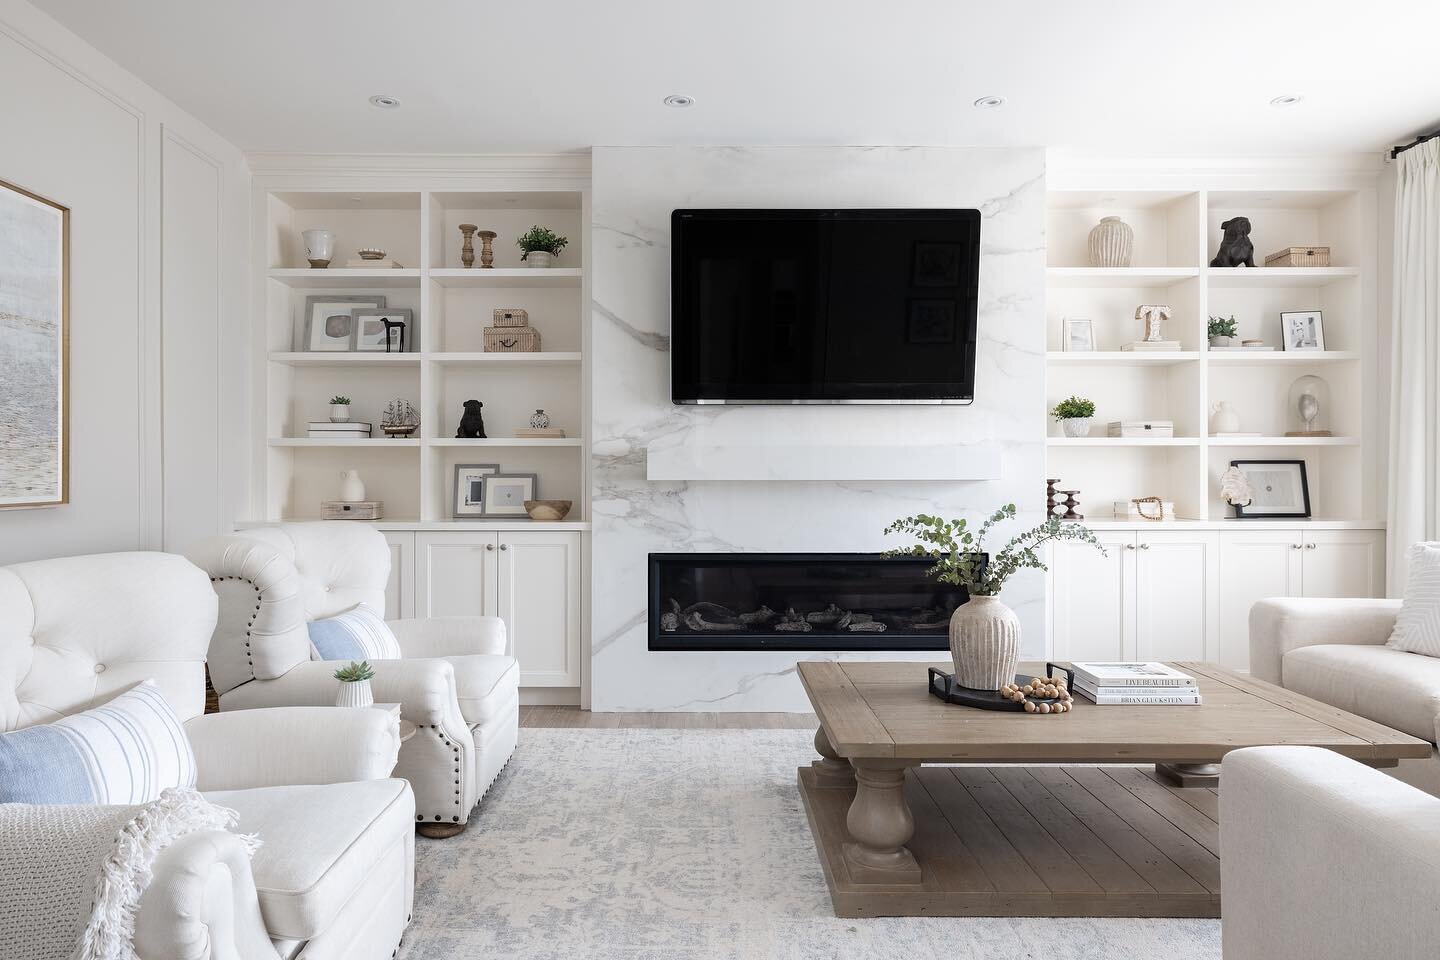 What a transformation! Swipe for the before photo of this family room -&gt; 
.
.
.
.
.
#jessicamendesdesign #beforeandafter #beforeandafterhomeedition #familyroomdecor #familyroomremodel #interiordesignertoronto #torontointeriordesign #torontointerio